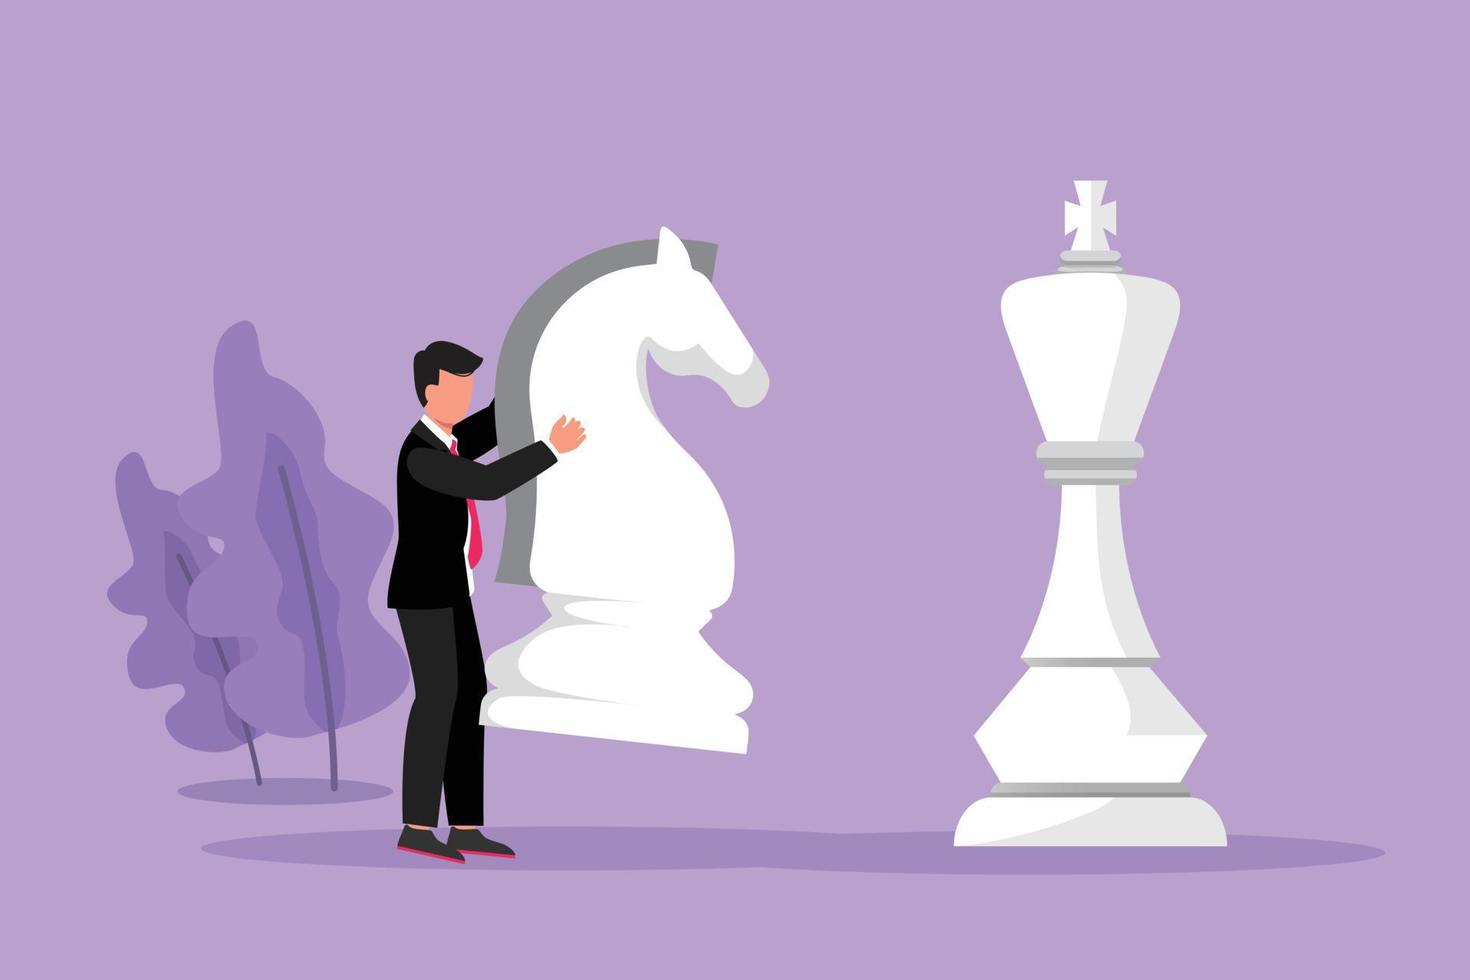 Cartoon flat style drawing businessman holding knight chess piece to beat king chess. Strategic planning, business development strategy, tactics in entrepreneurship. Graphic design vector illustration